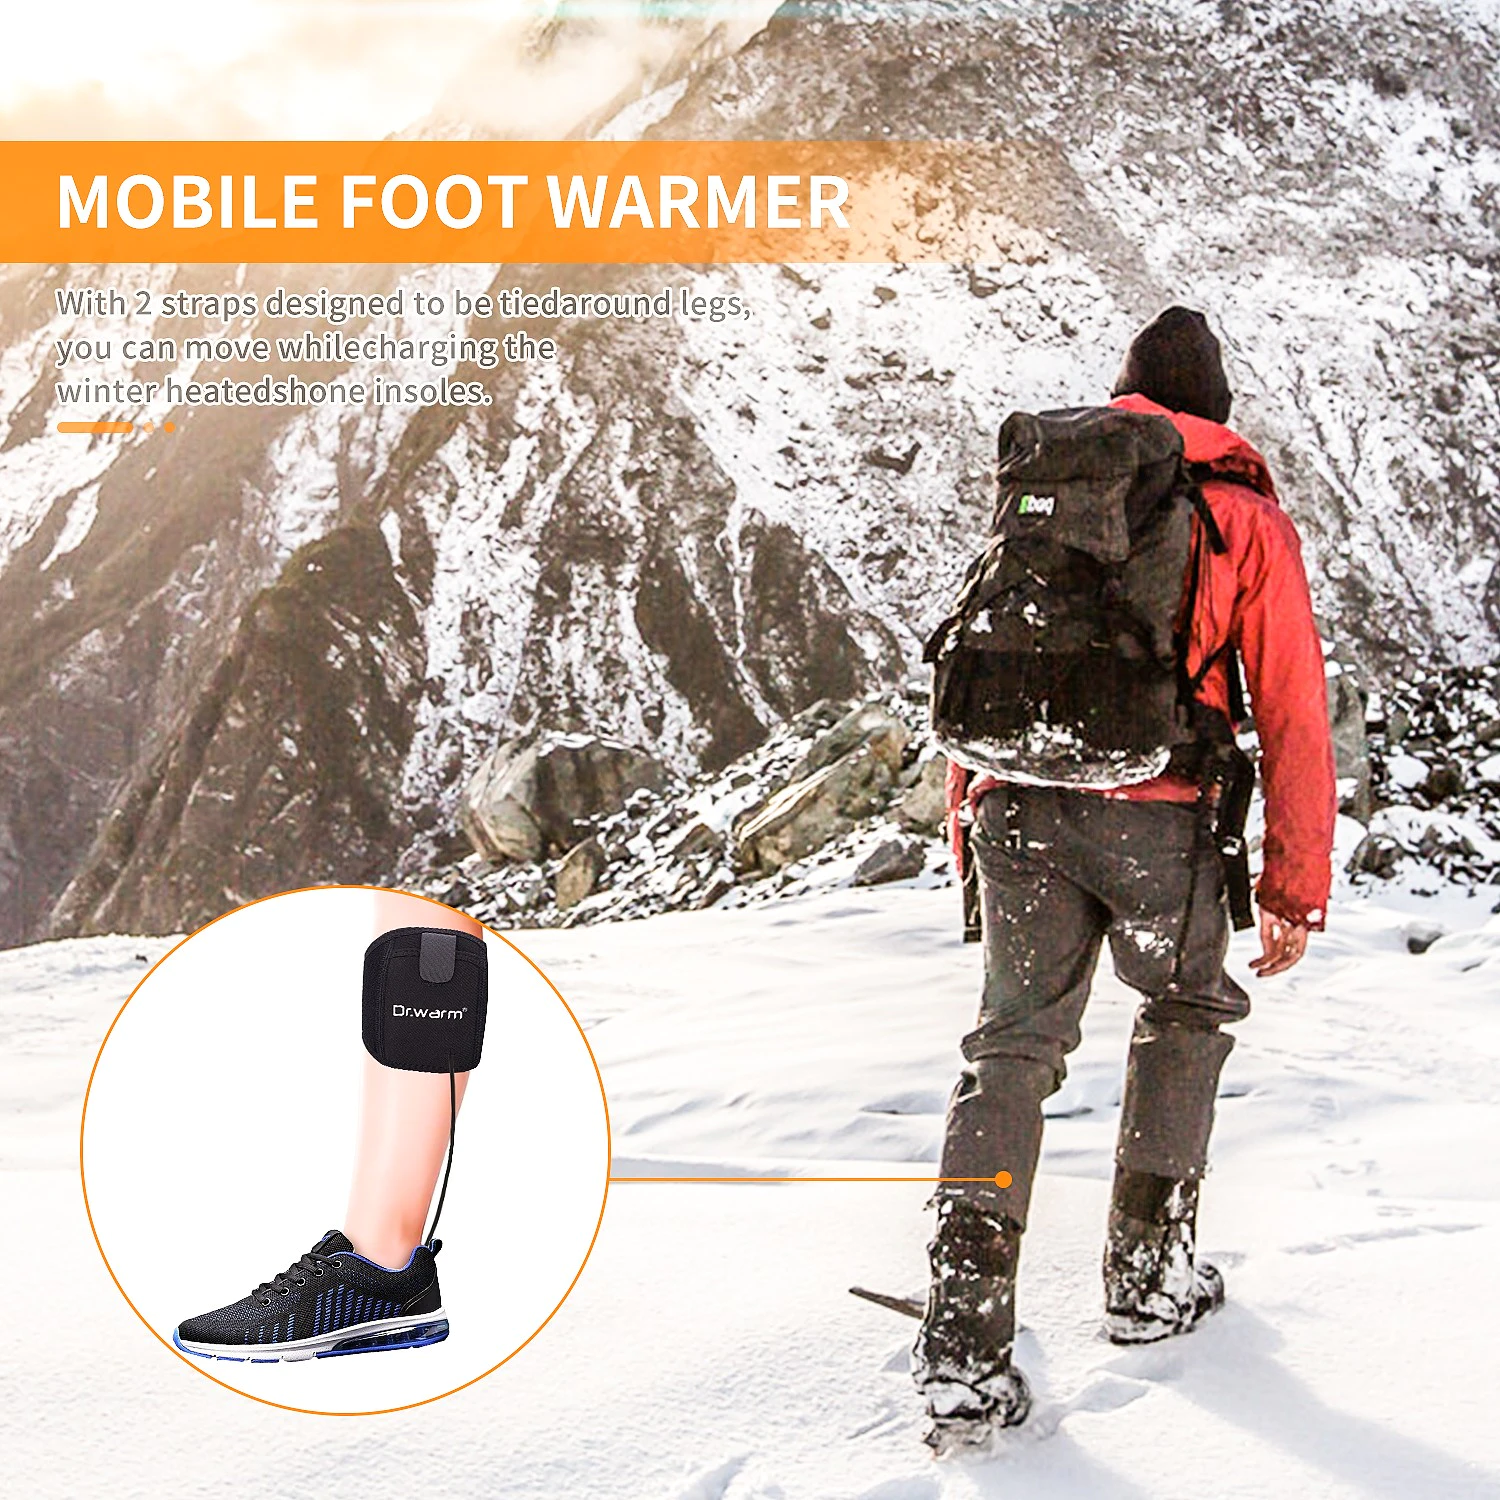 Dr. Warm rechargeable heated insoles for work boots fit to most shoes for indoor use